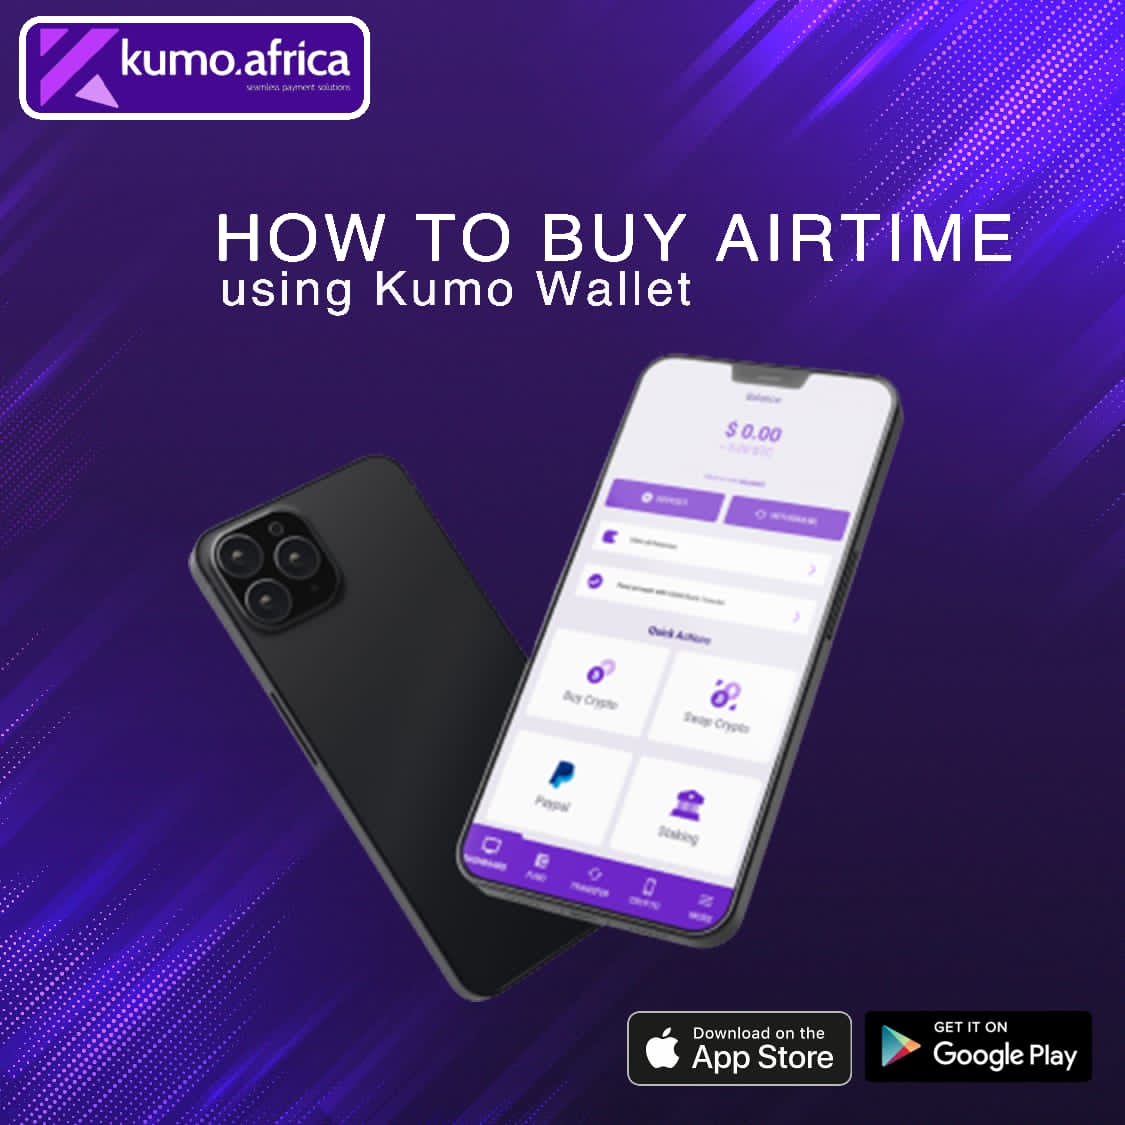 How to buy airtime on Kumo wallet